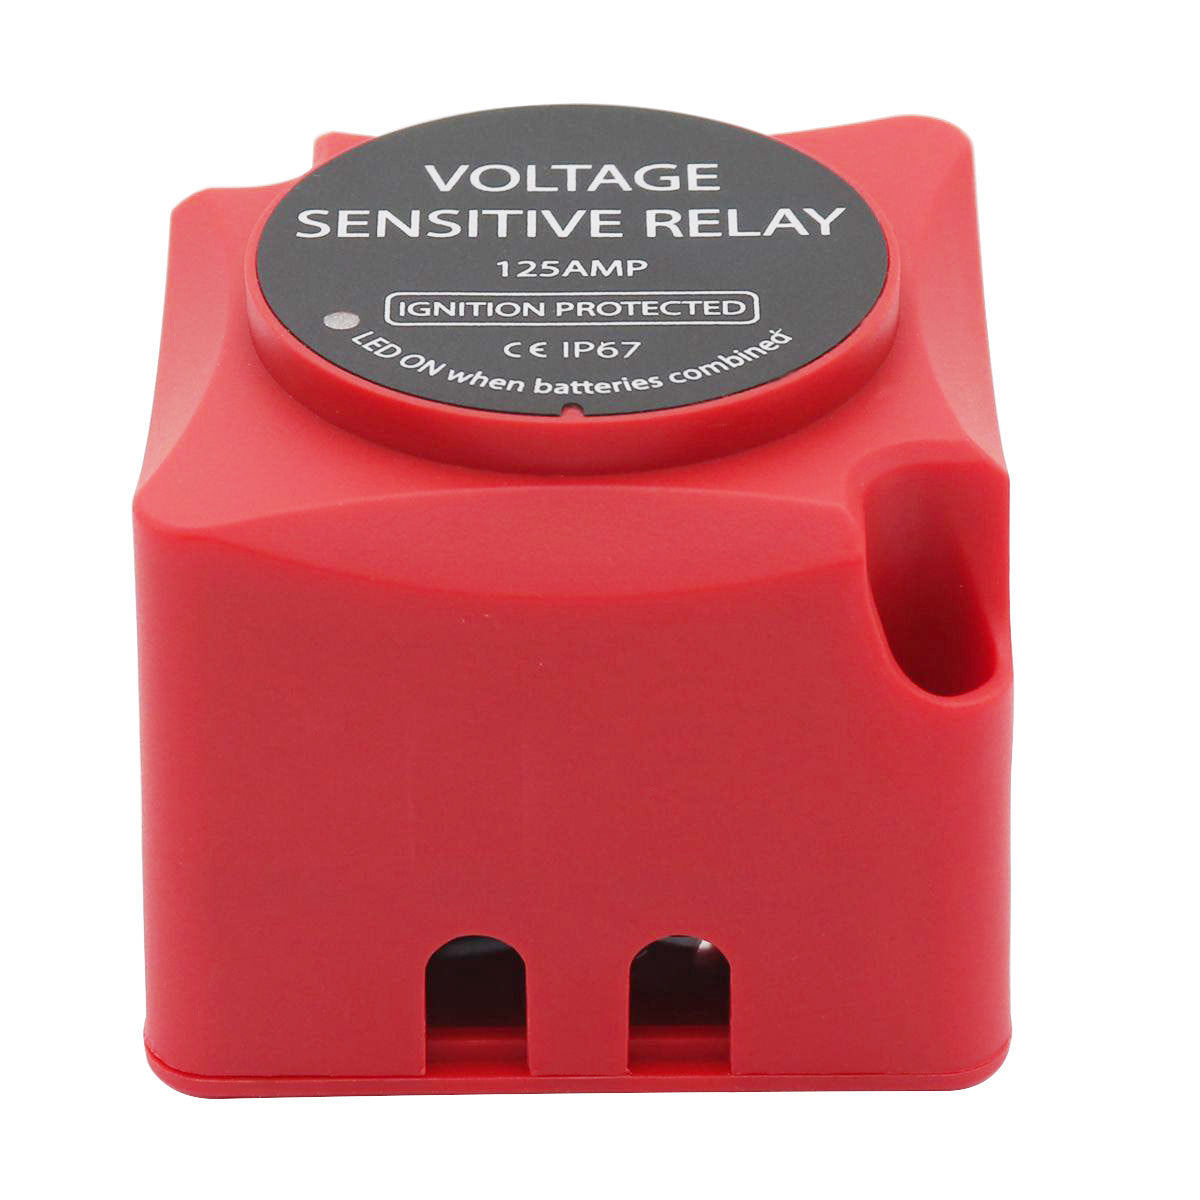 Sensitive Relay For RV And Yacht Automatic Charger.